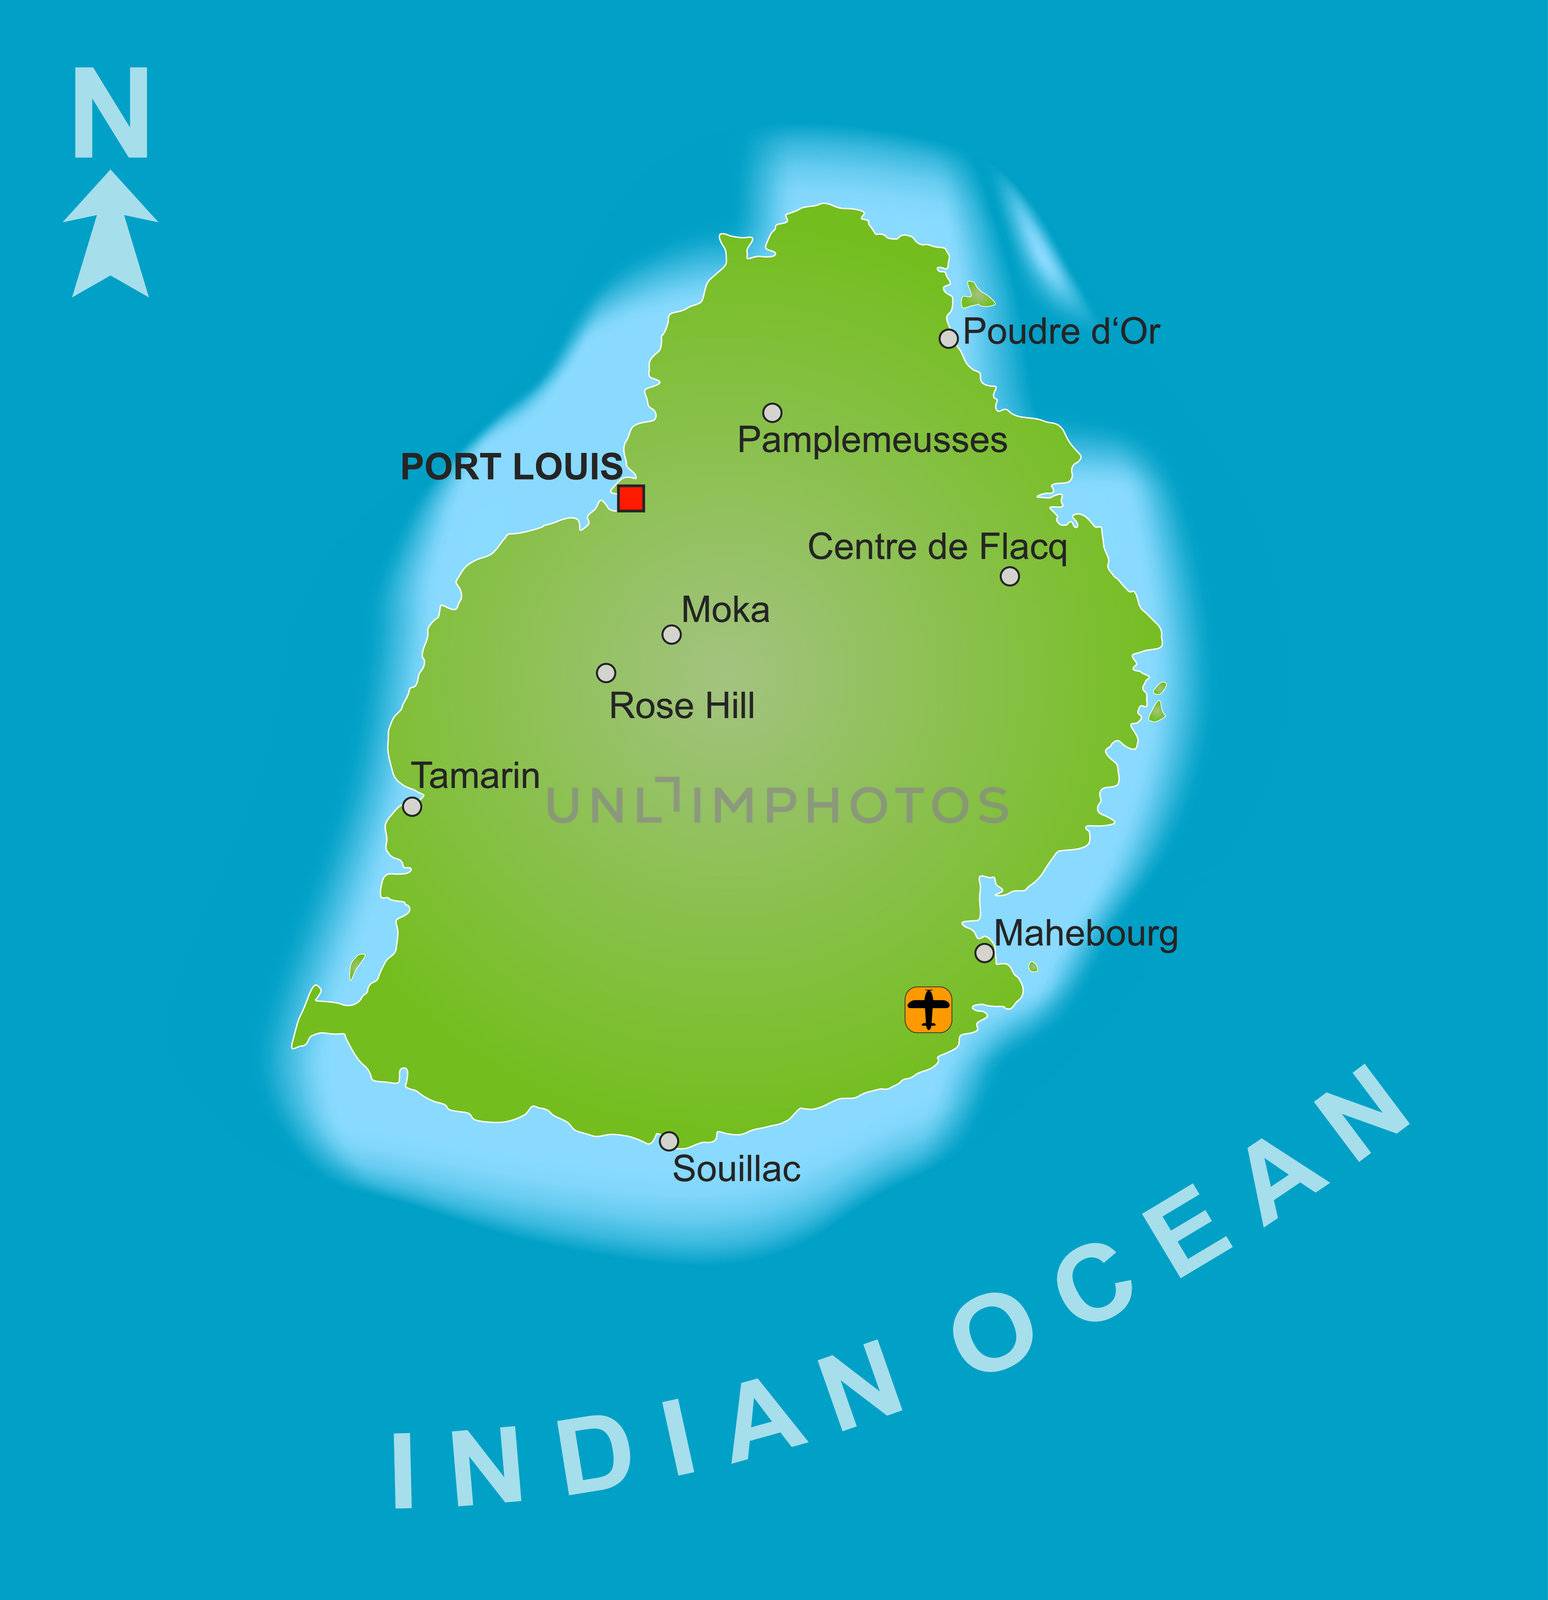 A stylized map of Mauritius showing the island and different cities.